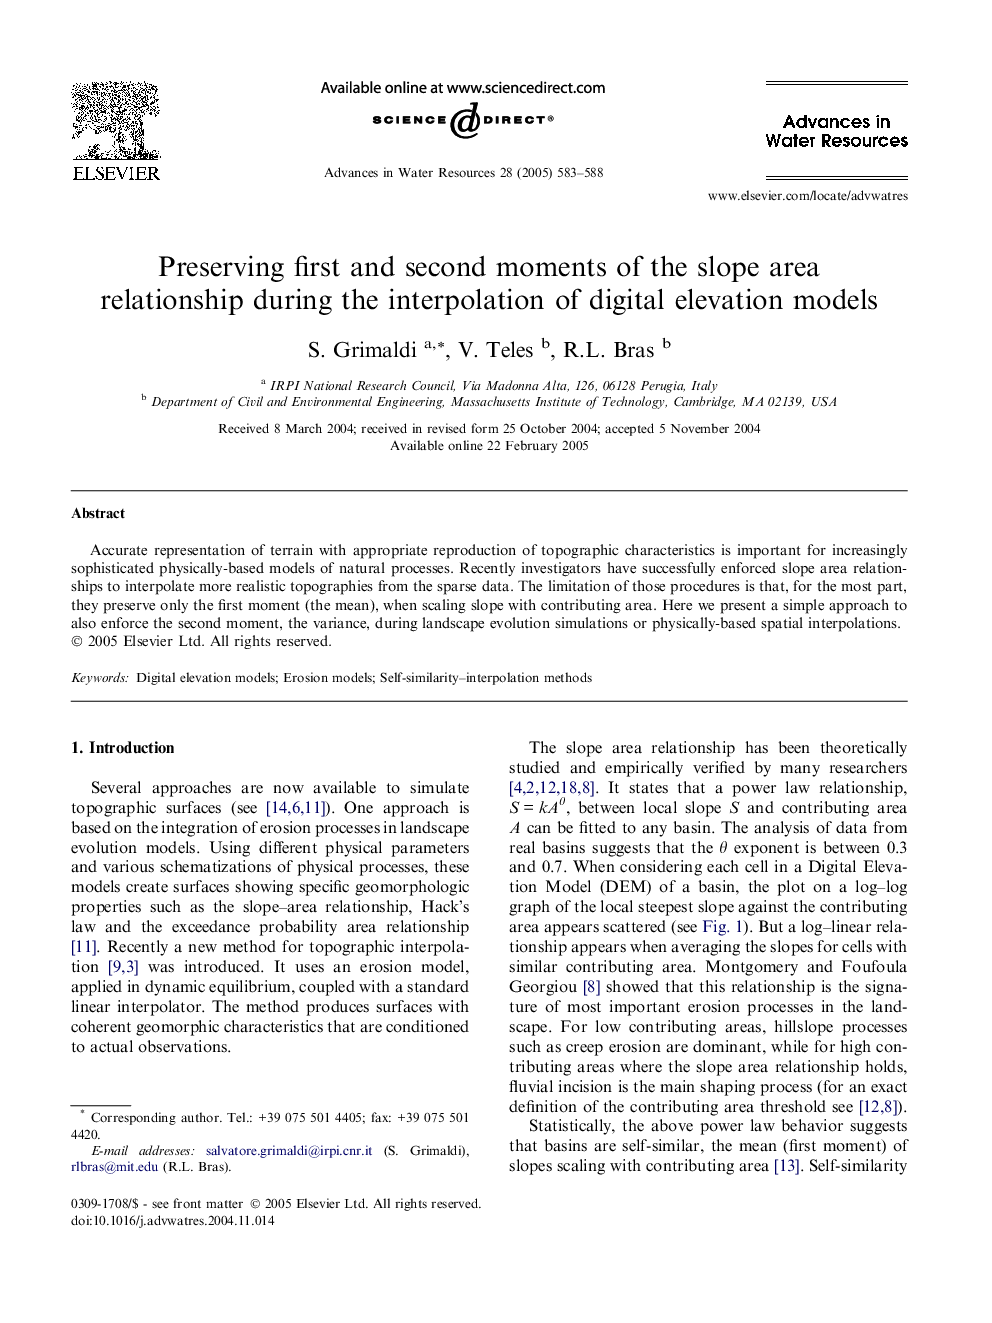 Preserving first and second moments of the slope area relationship during the interpolation of digital elevation models